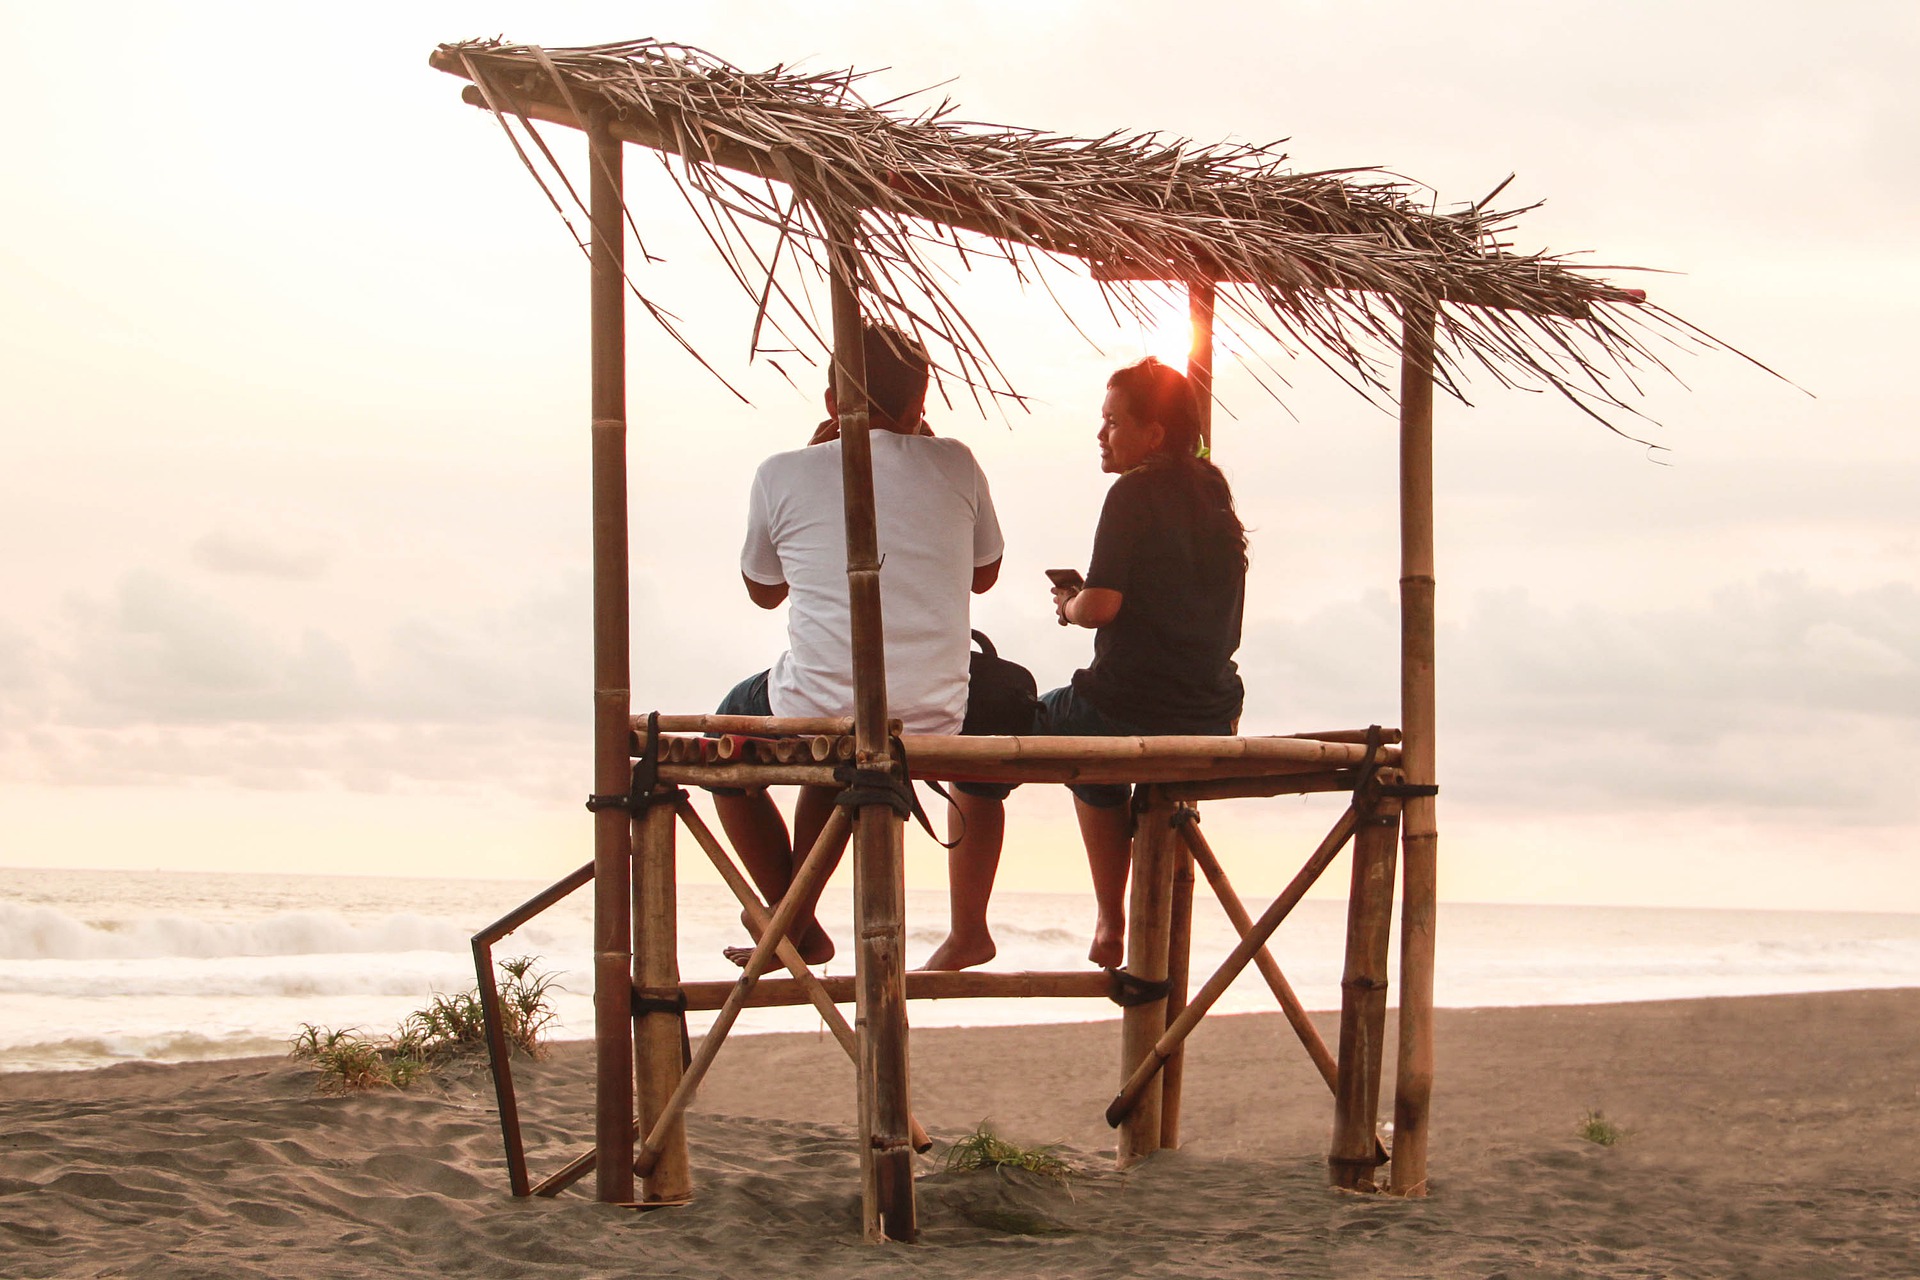 Romantic Activities for Couples in Cabo San Lucas